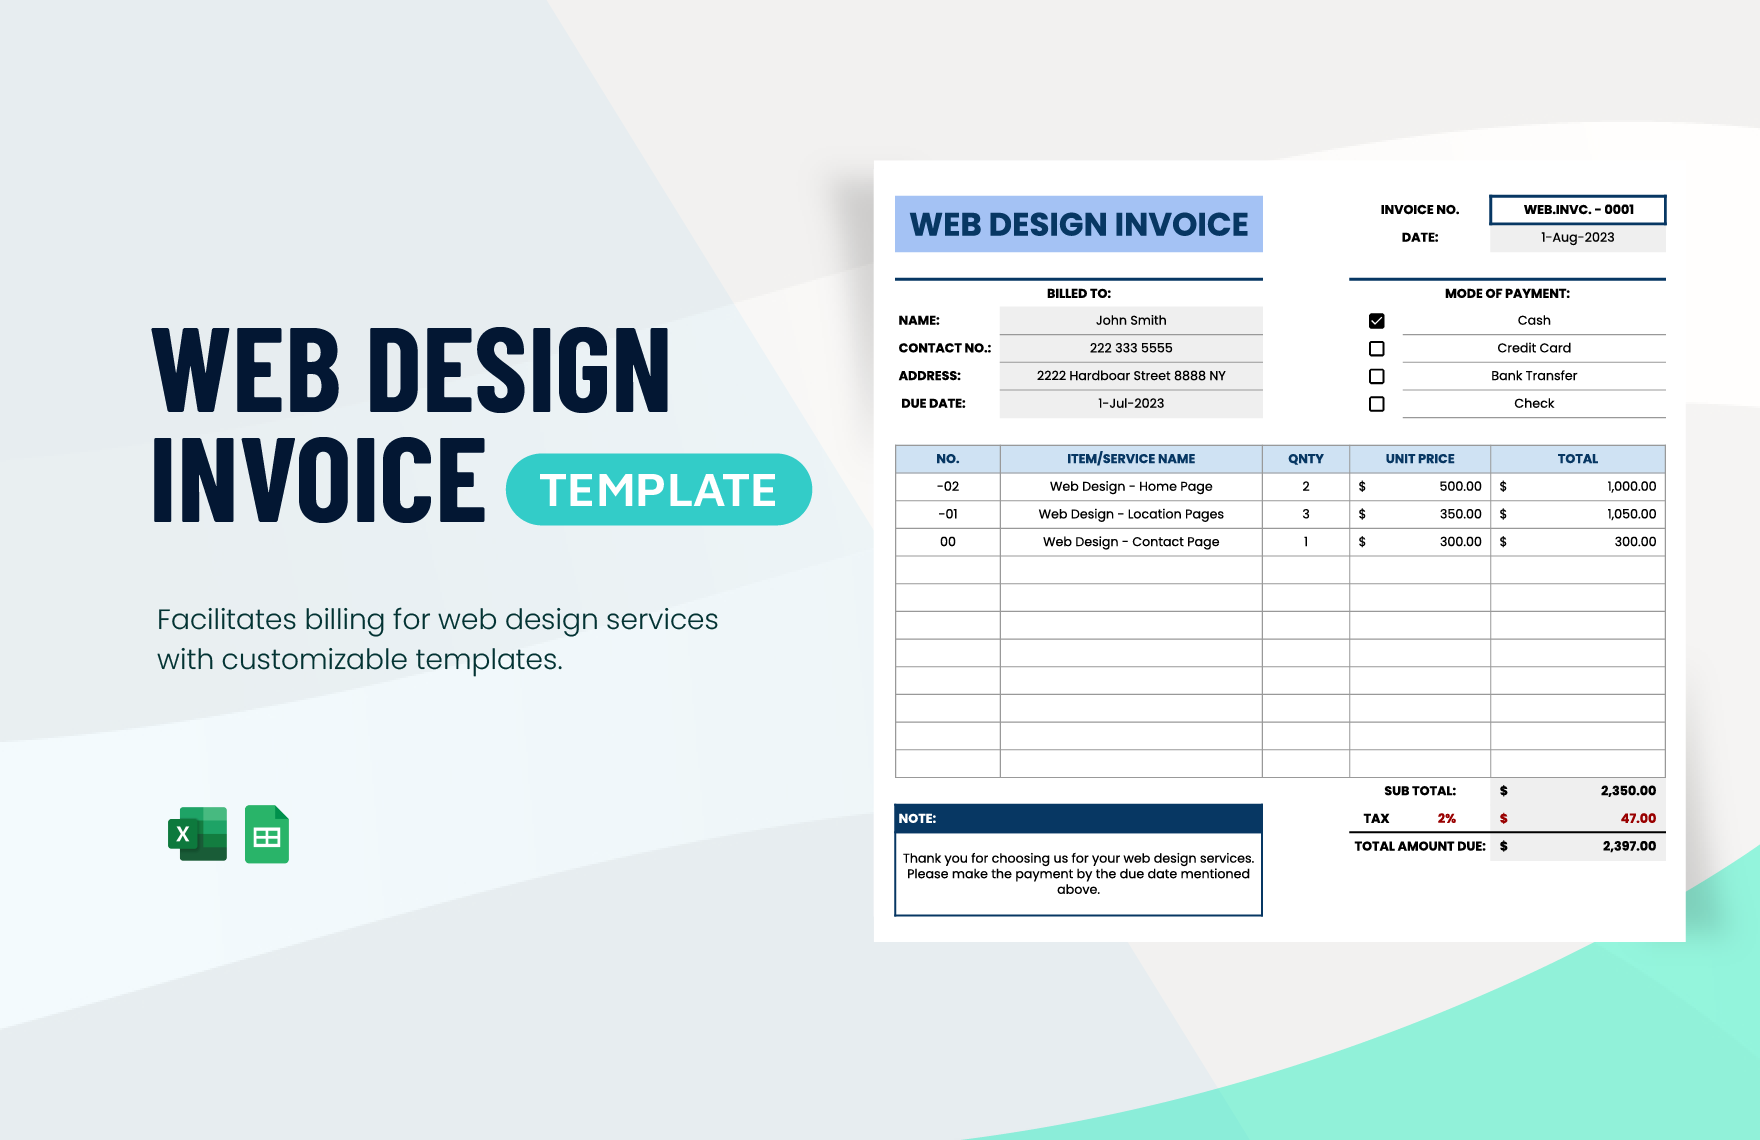 Web Design Invoice Template in Excel, Google Sheets